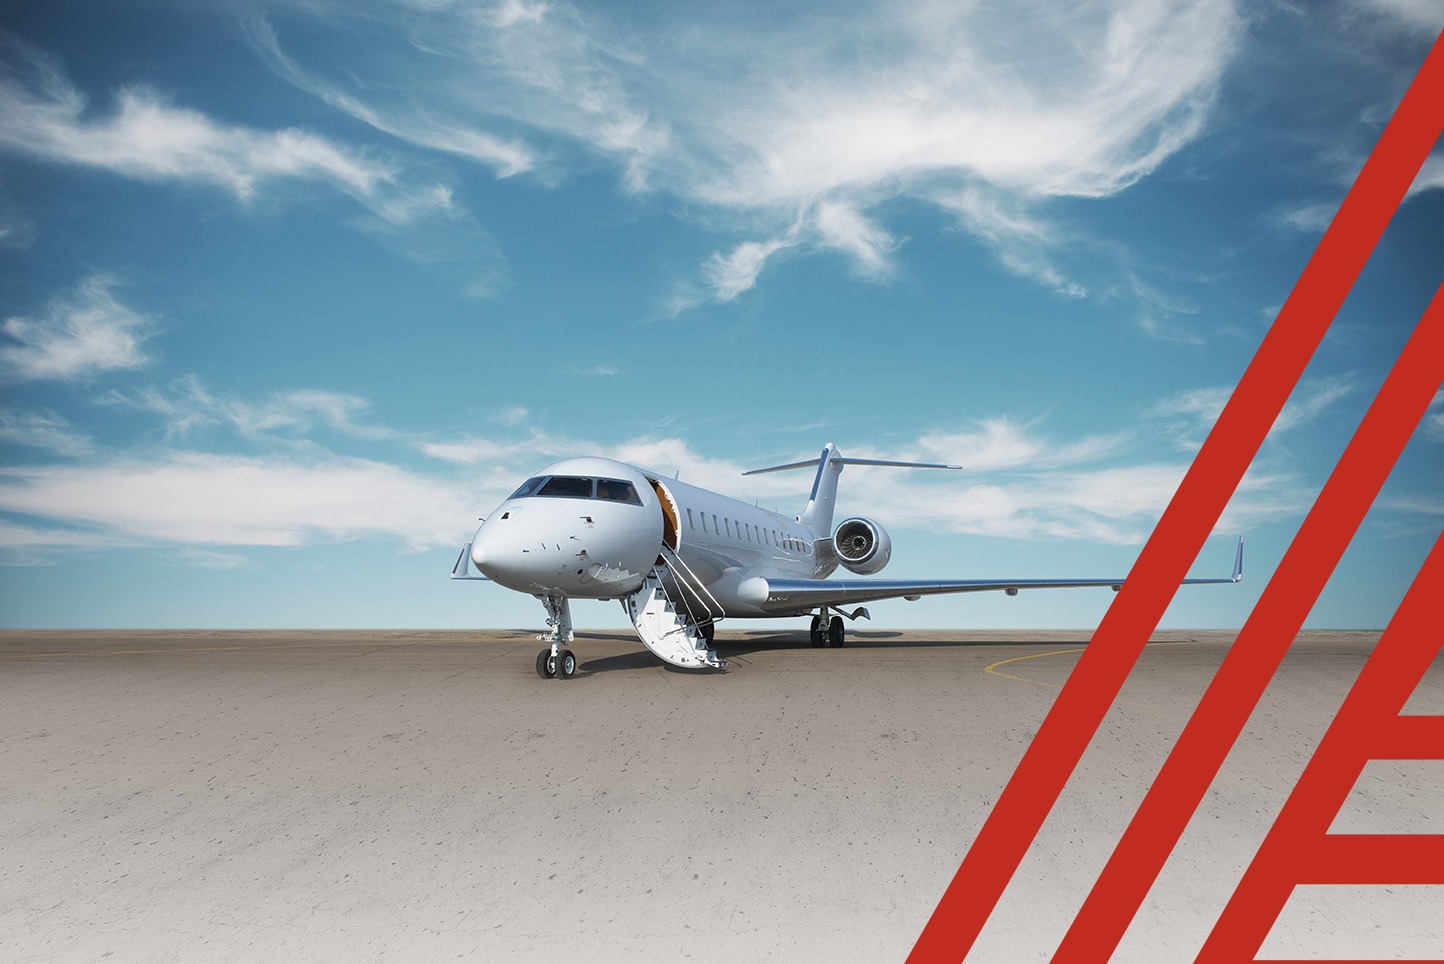 Plane on landing strip with icon overlaid on image